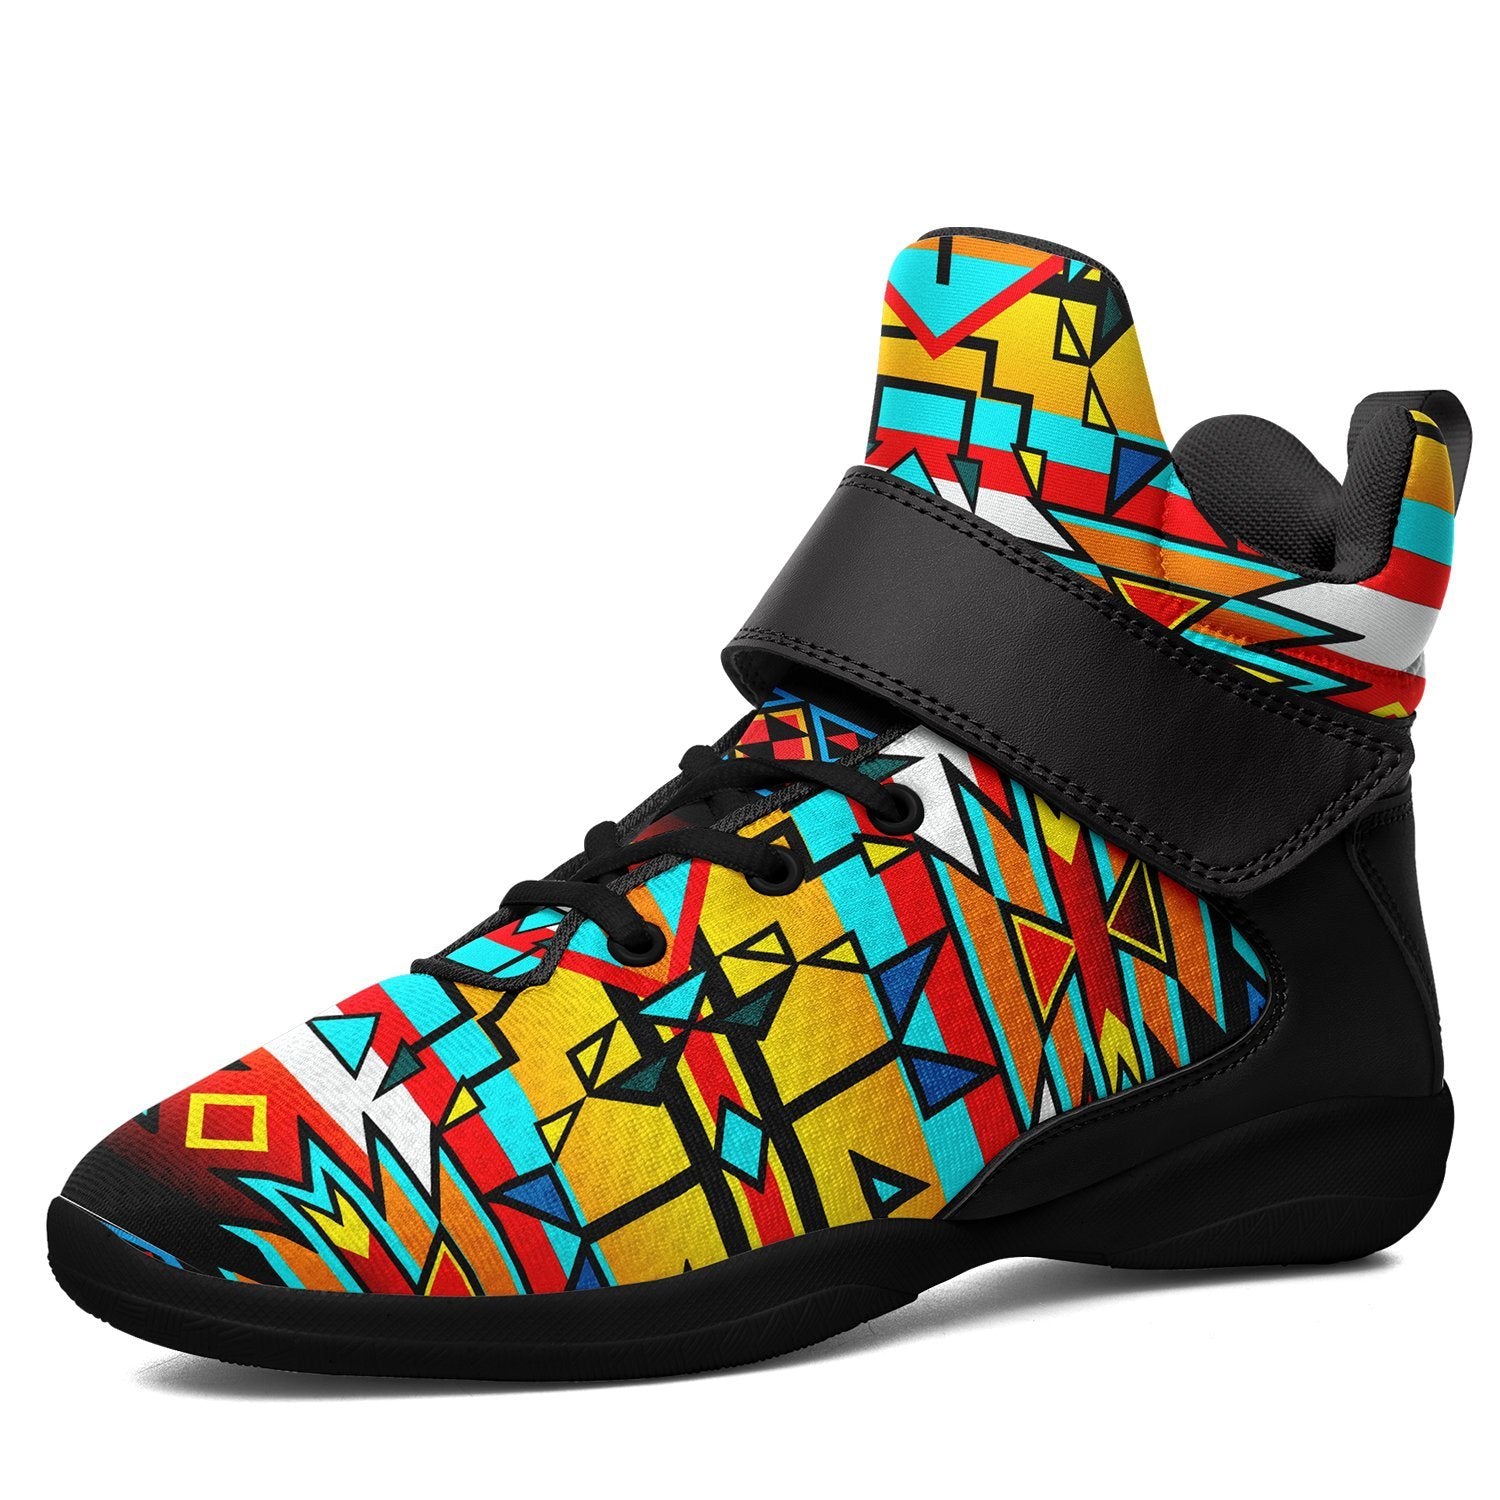 Force of Nature Twister Ipottaa Basketball / Sport High Top Shoes 49 Dzine US Women 4.5 / US Youth 3.5 / EUR 35 Black Sole with Black Strap 